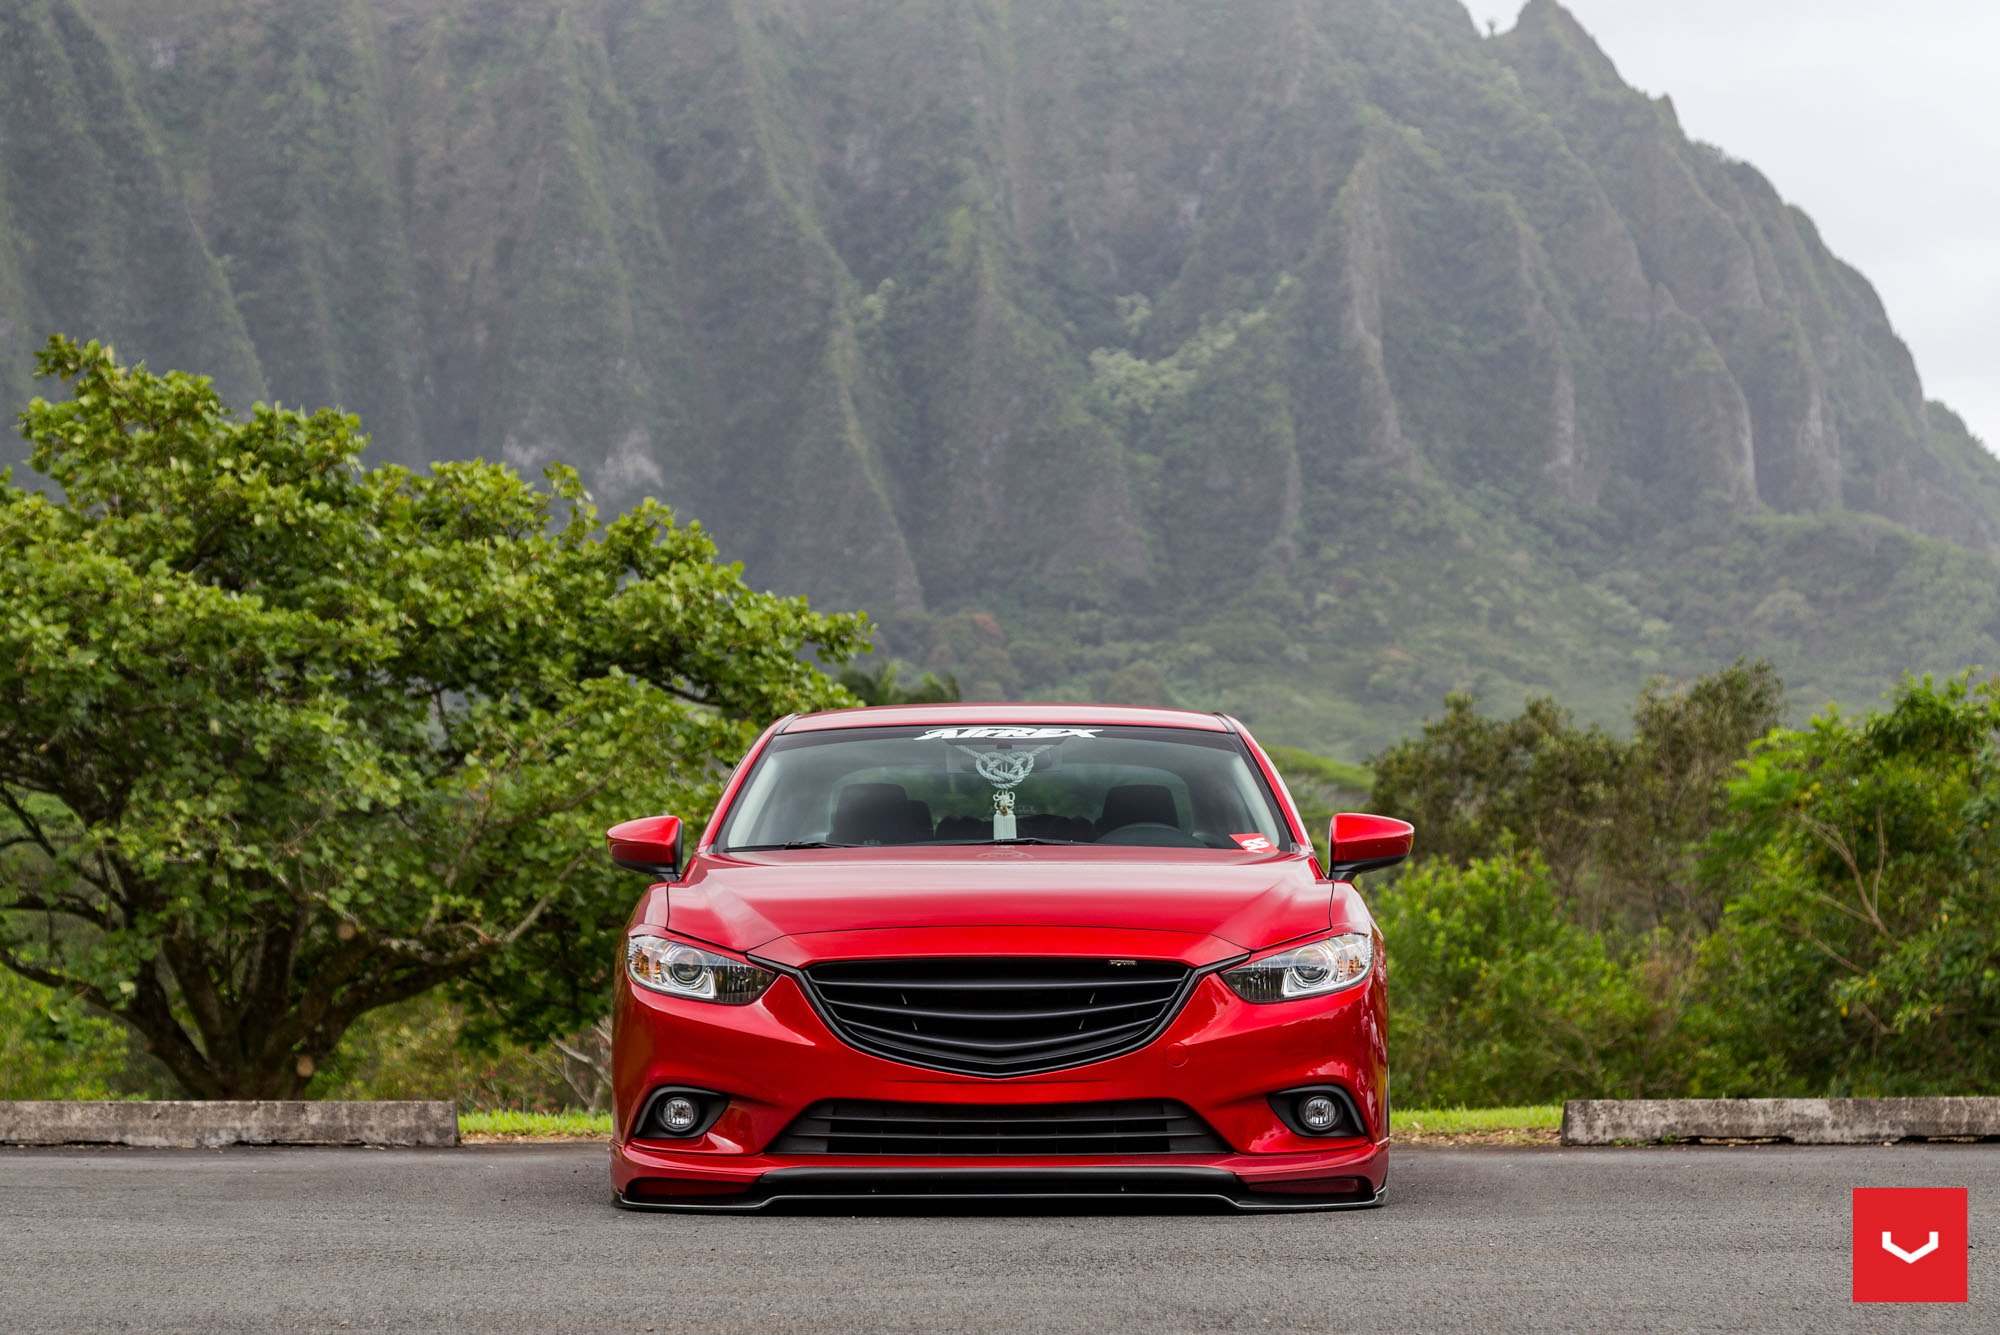 Blacked Out Billet Grille on Red Mazda 6 - Photo by Vossen